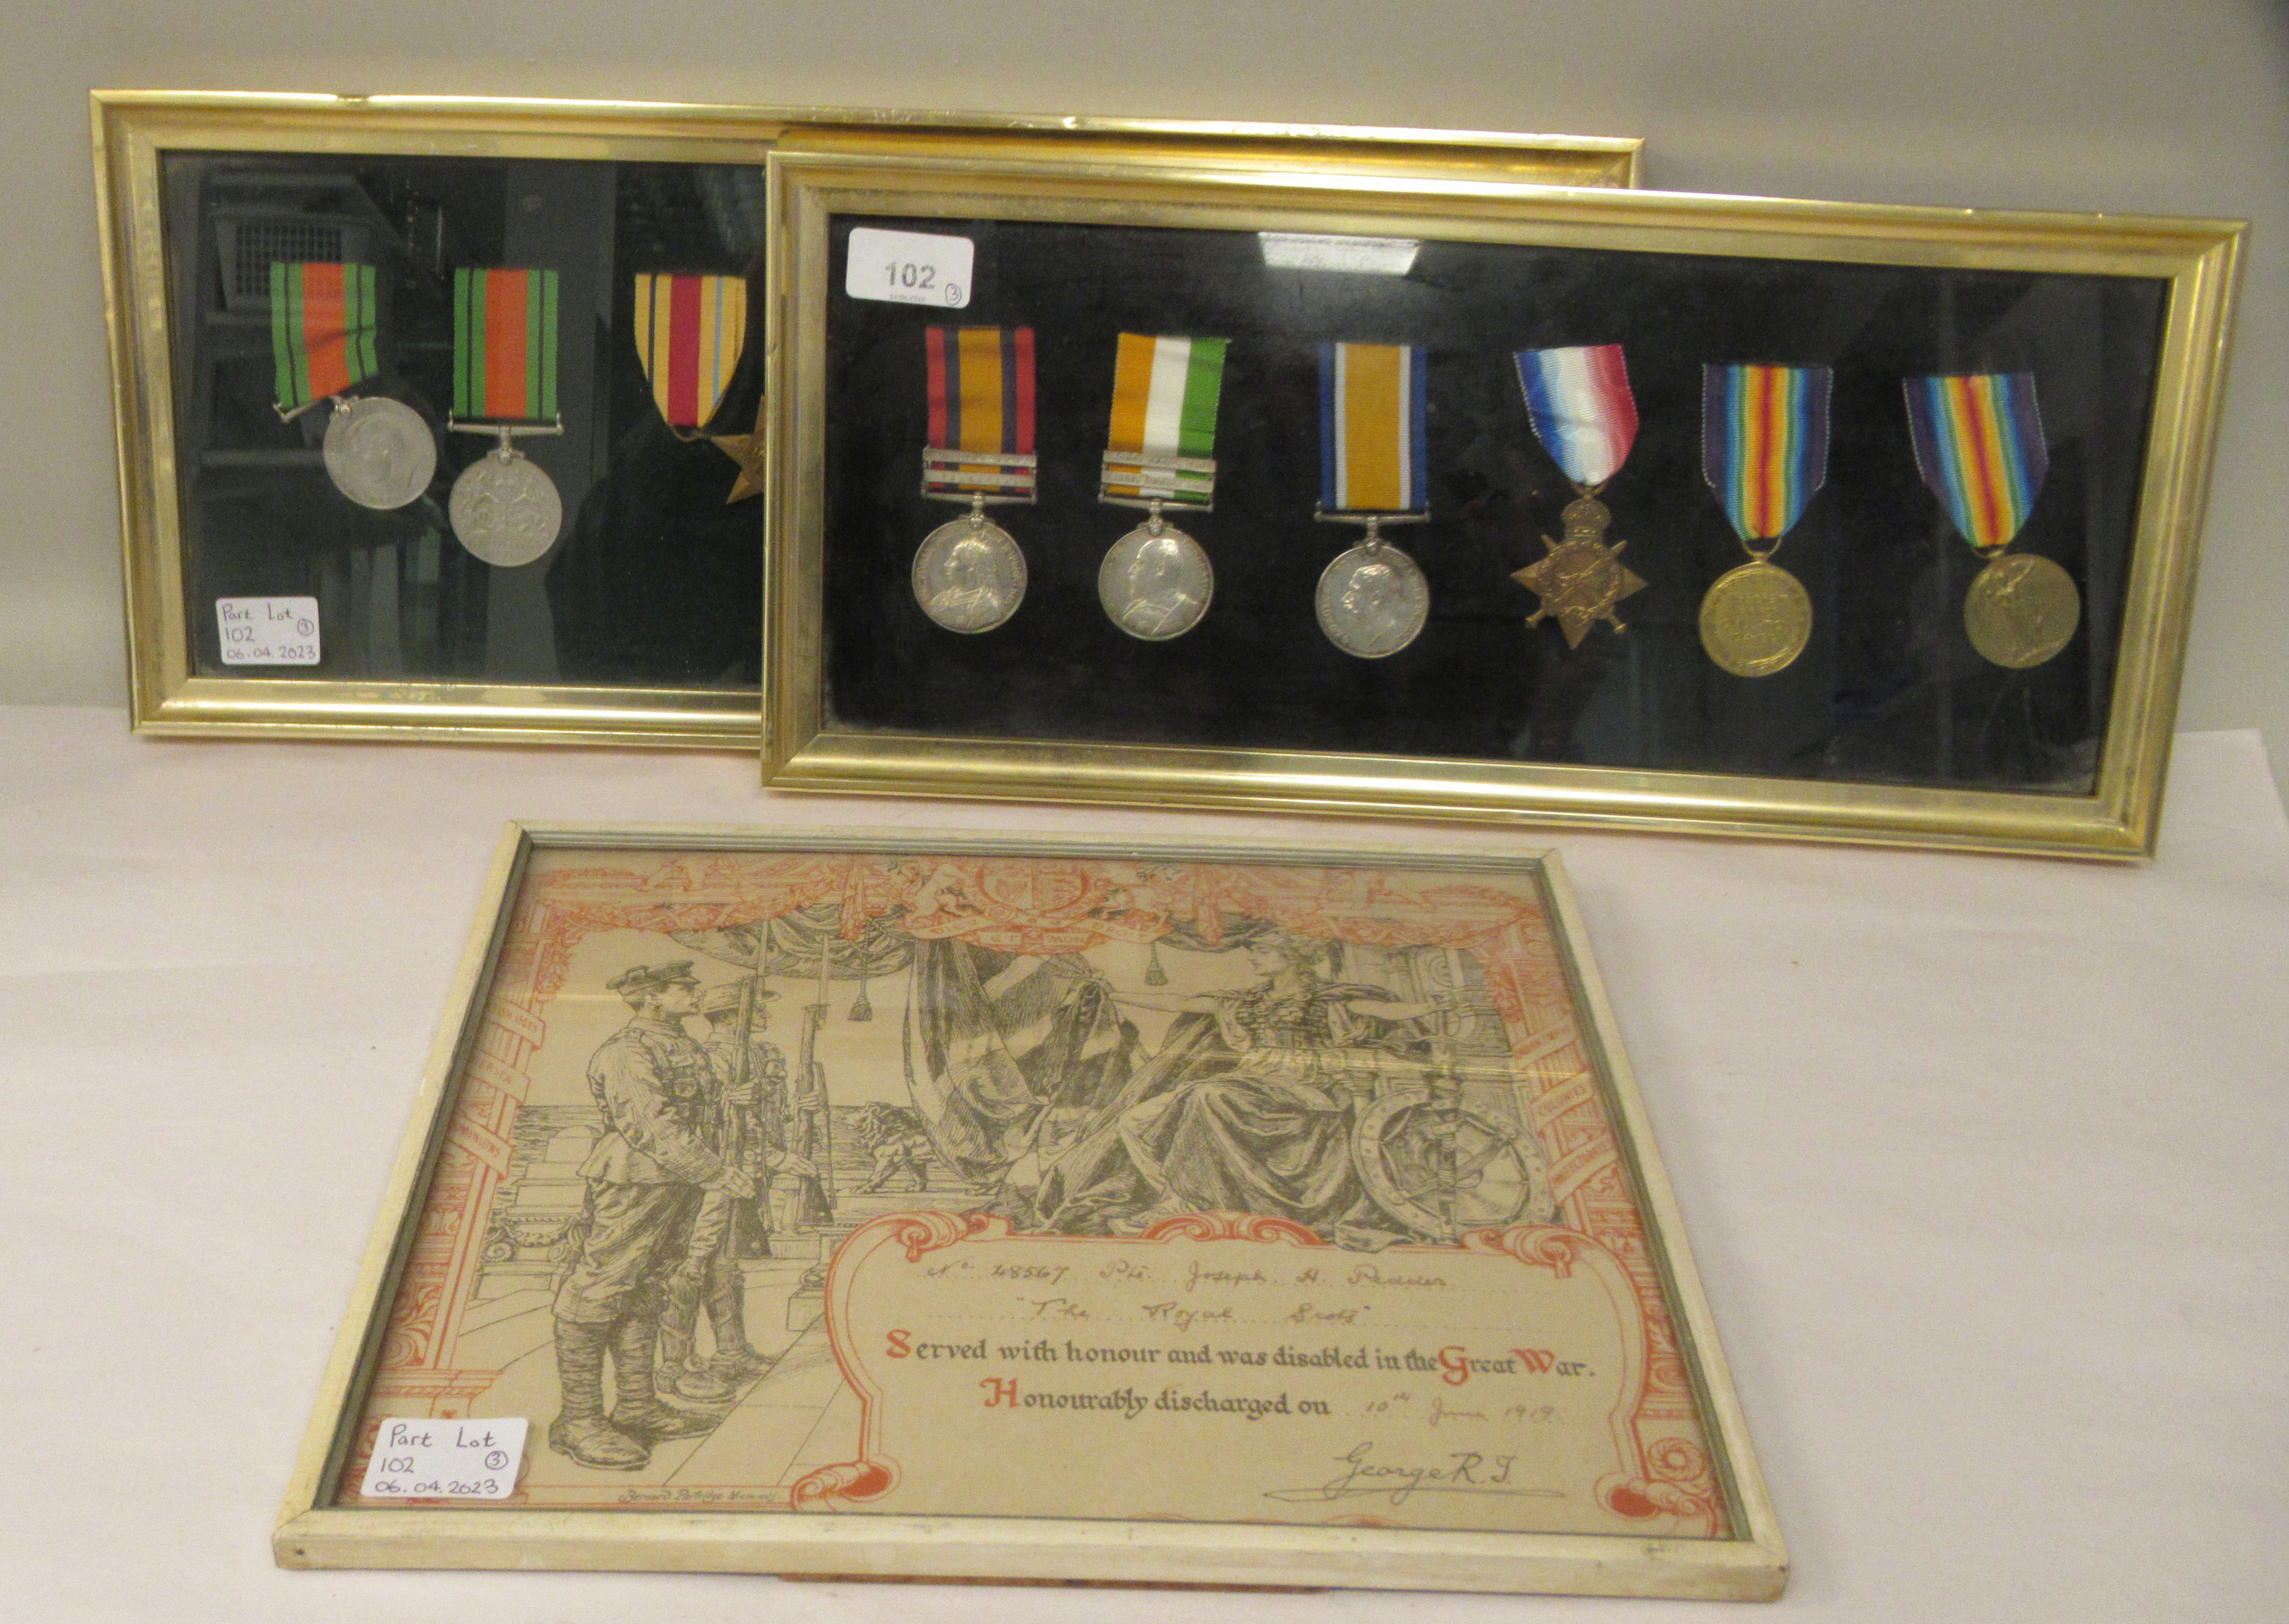 A group of six Victorian/Edwardian British military medals on ribbons, awarded to 23653 Pte. J H